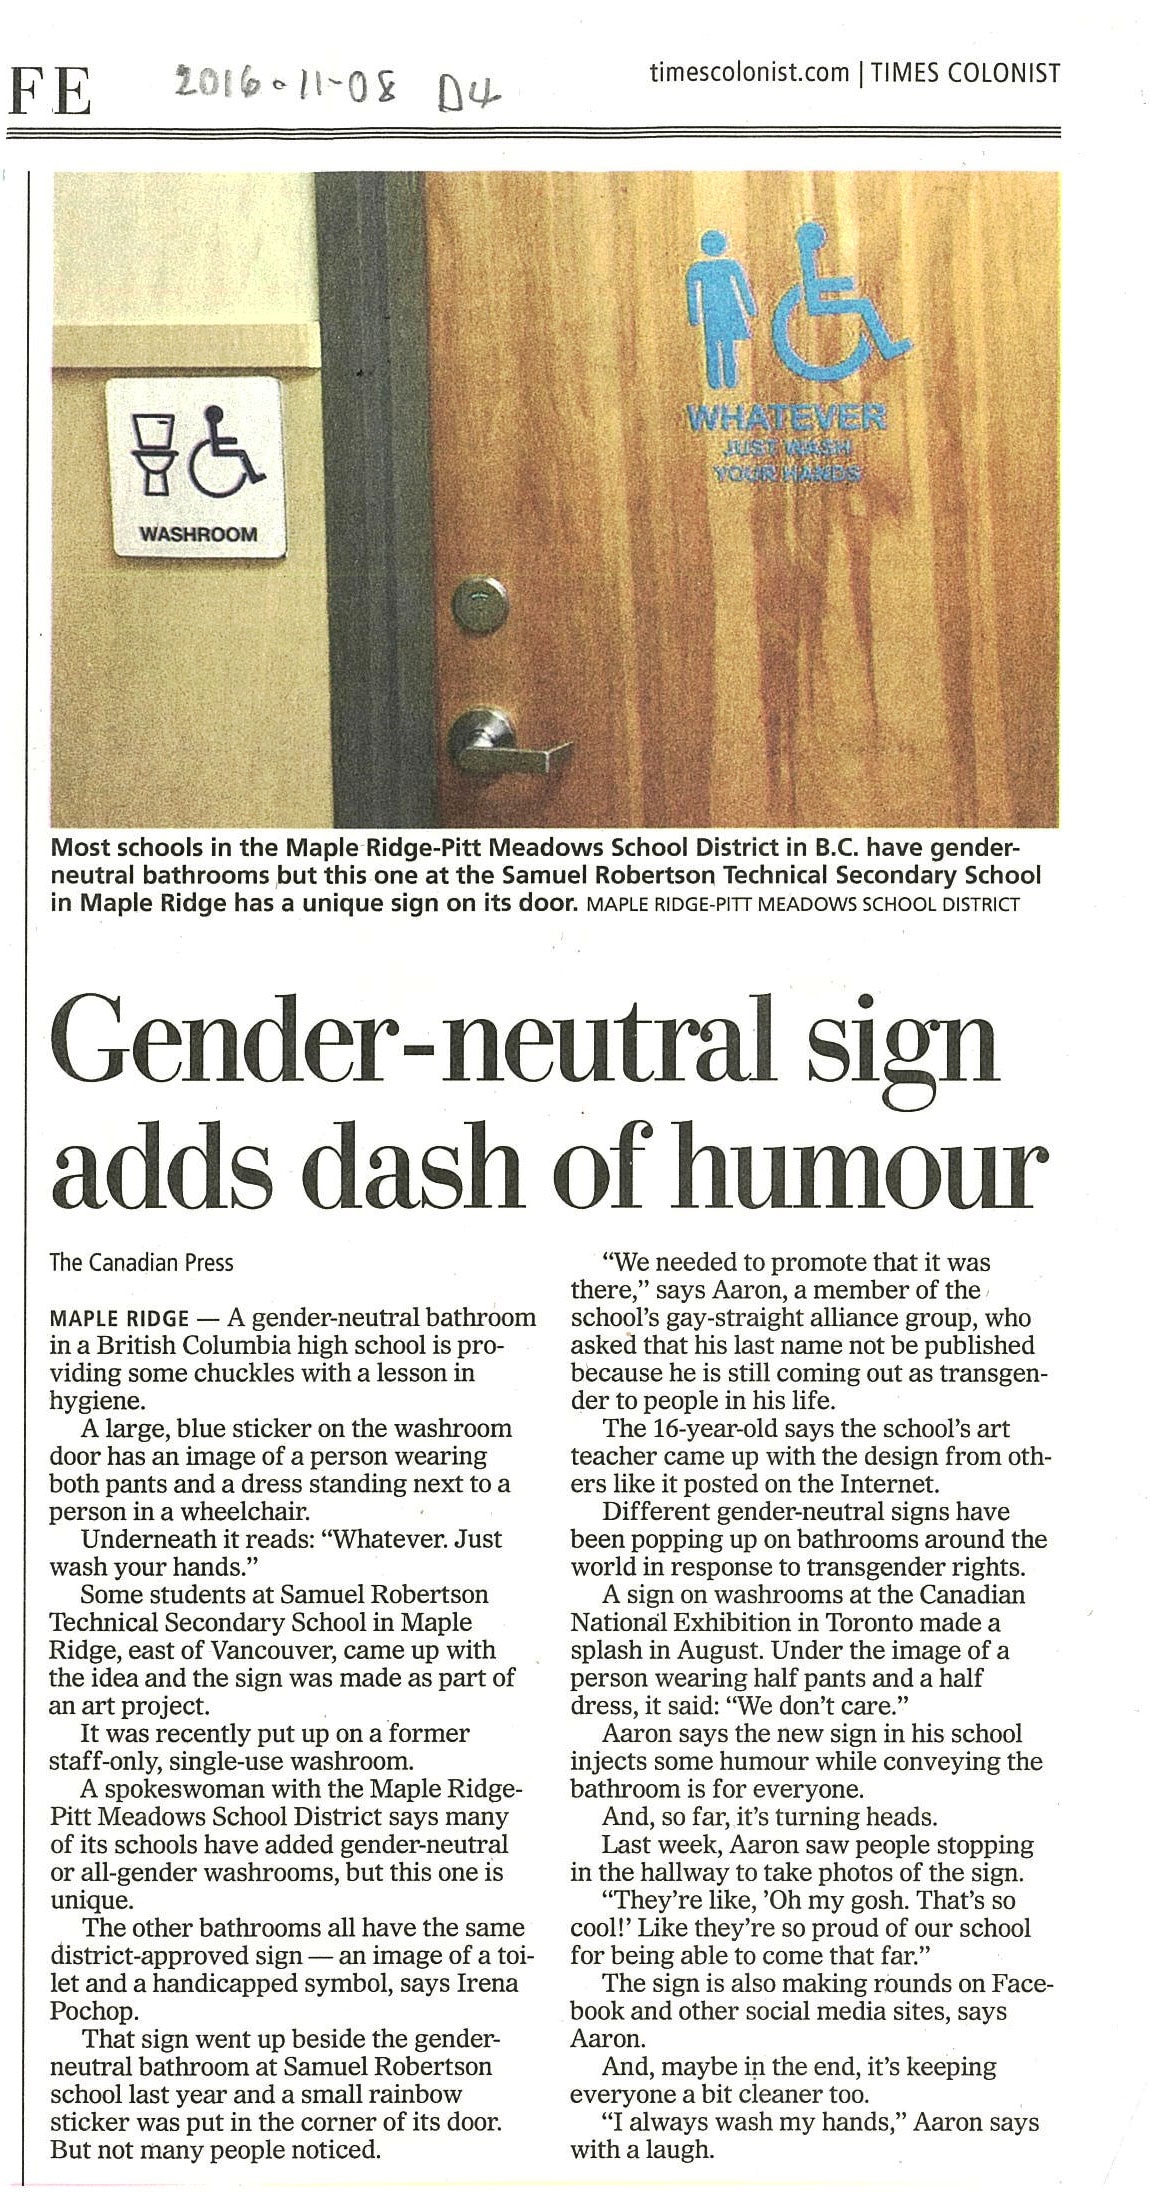 Newspaper article with accompanying photo of a sign showing a figure wearing pants on their right half and a skirt on their left and another figure in a wheelchair, with the text 'whatever; just wash your hands.'